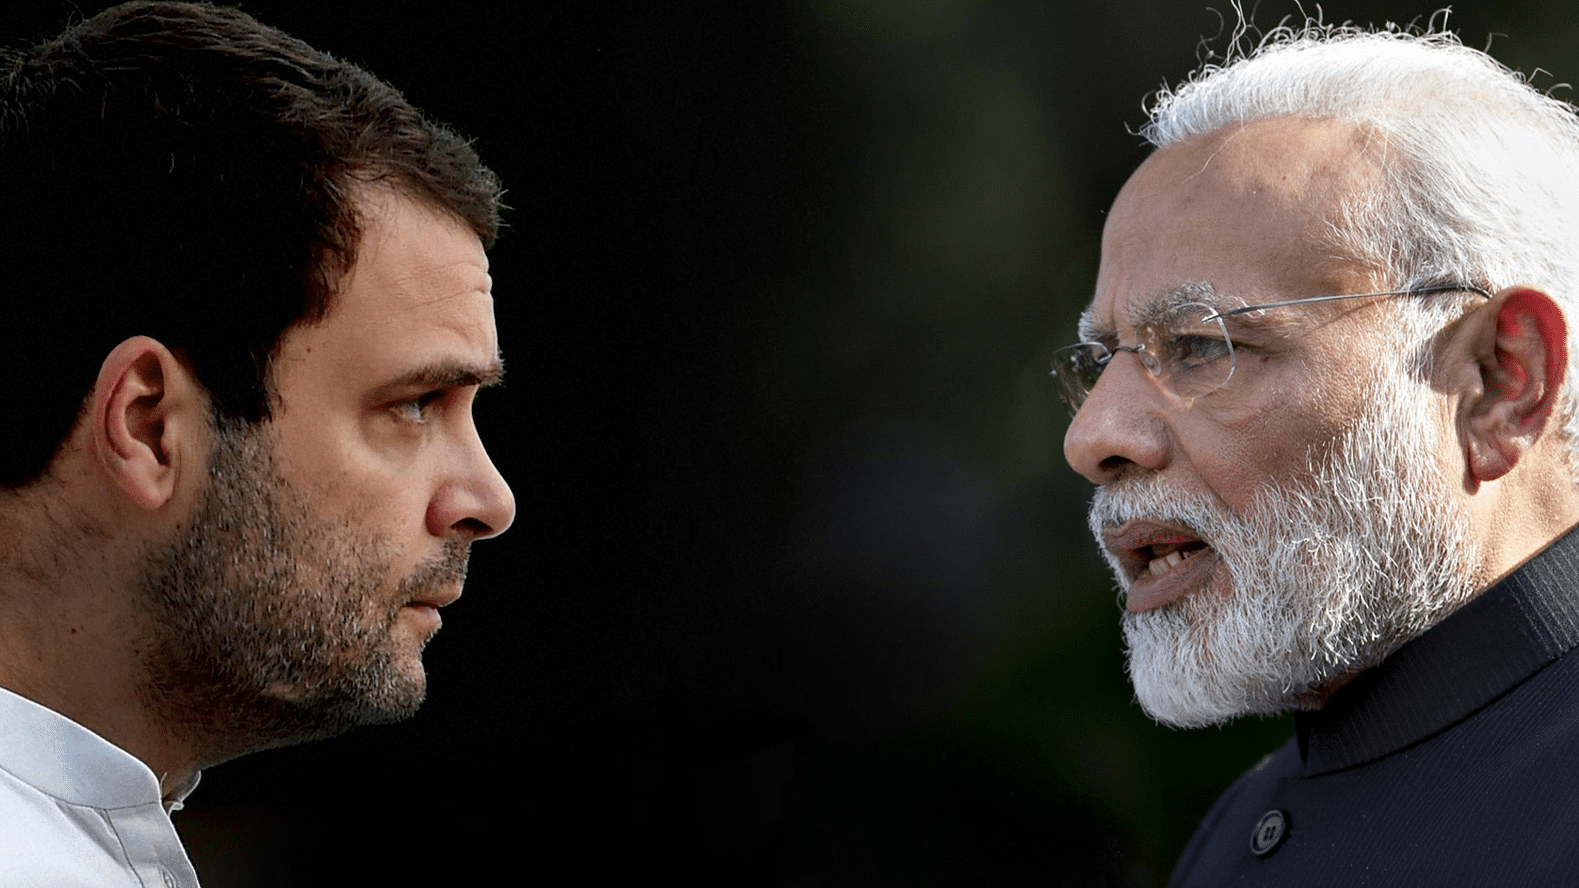 “The trail of corruption begins and ends with him,” Rahul Gandhi said while accusing PM Modi.